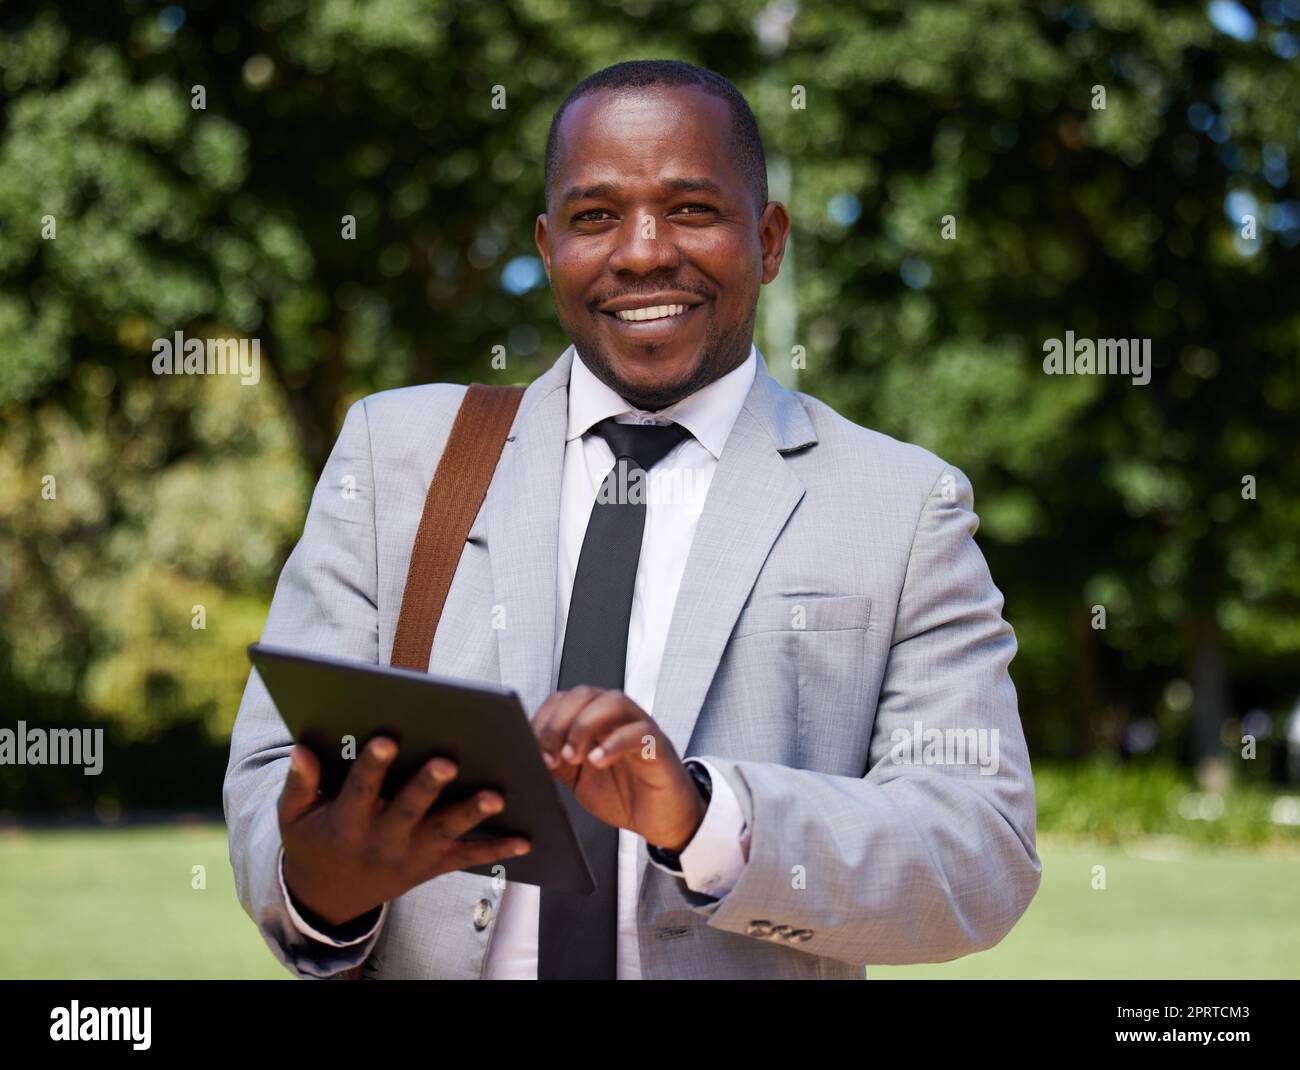 Black man, tablet schedule or business travel in park, nature garden or community environment in morning to work. Portrait, smile or happy worker or interview employee with 5g communication technoloy Stock Photo